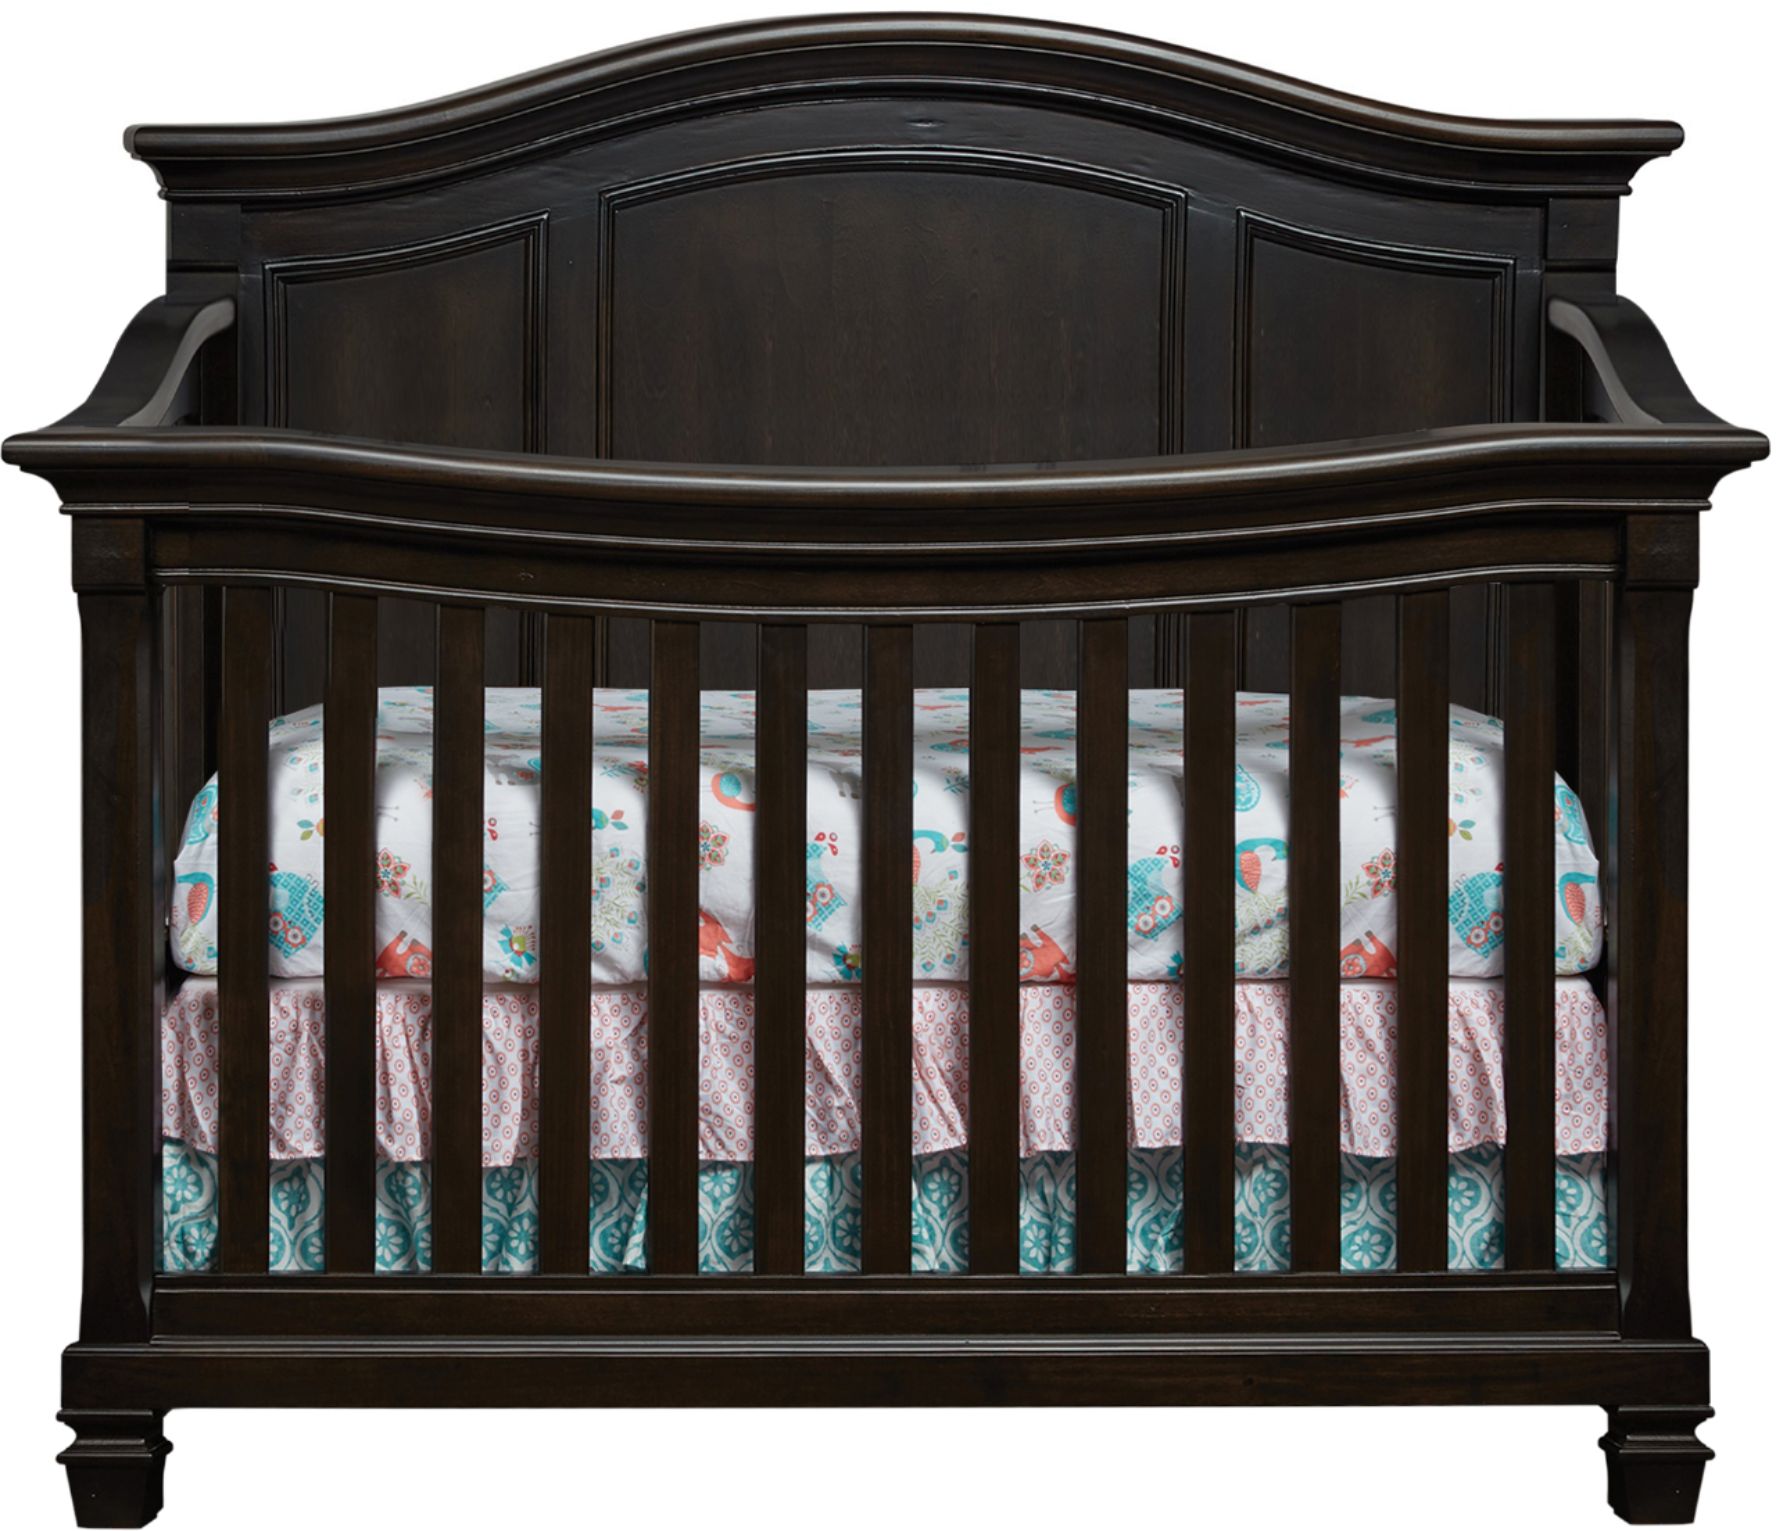 baby cache 4 in 1 crib